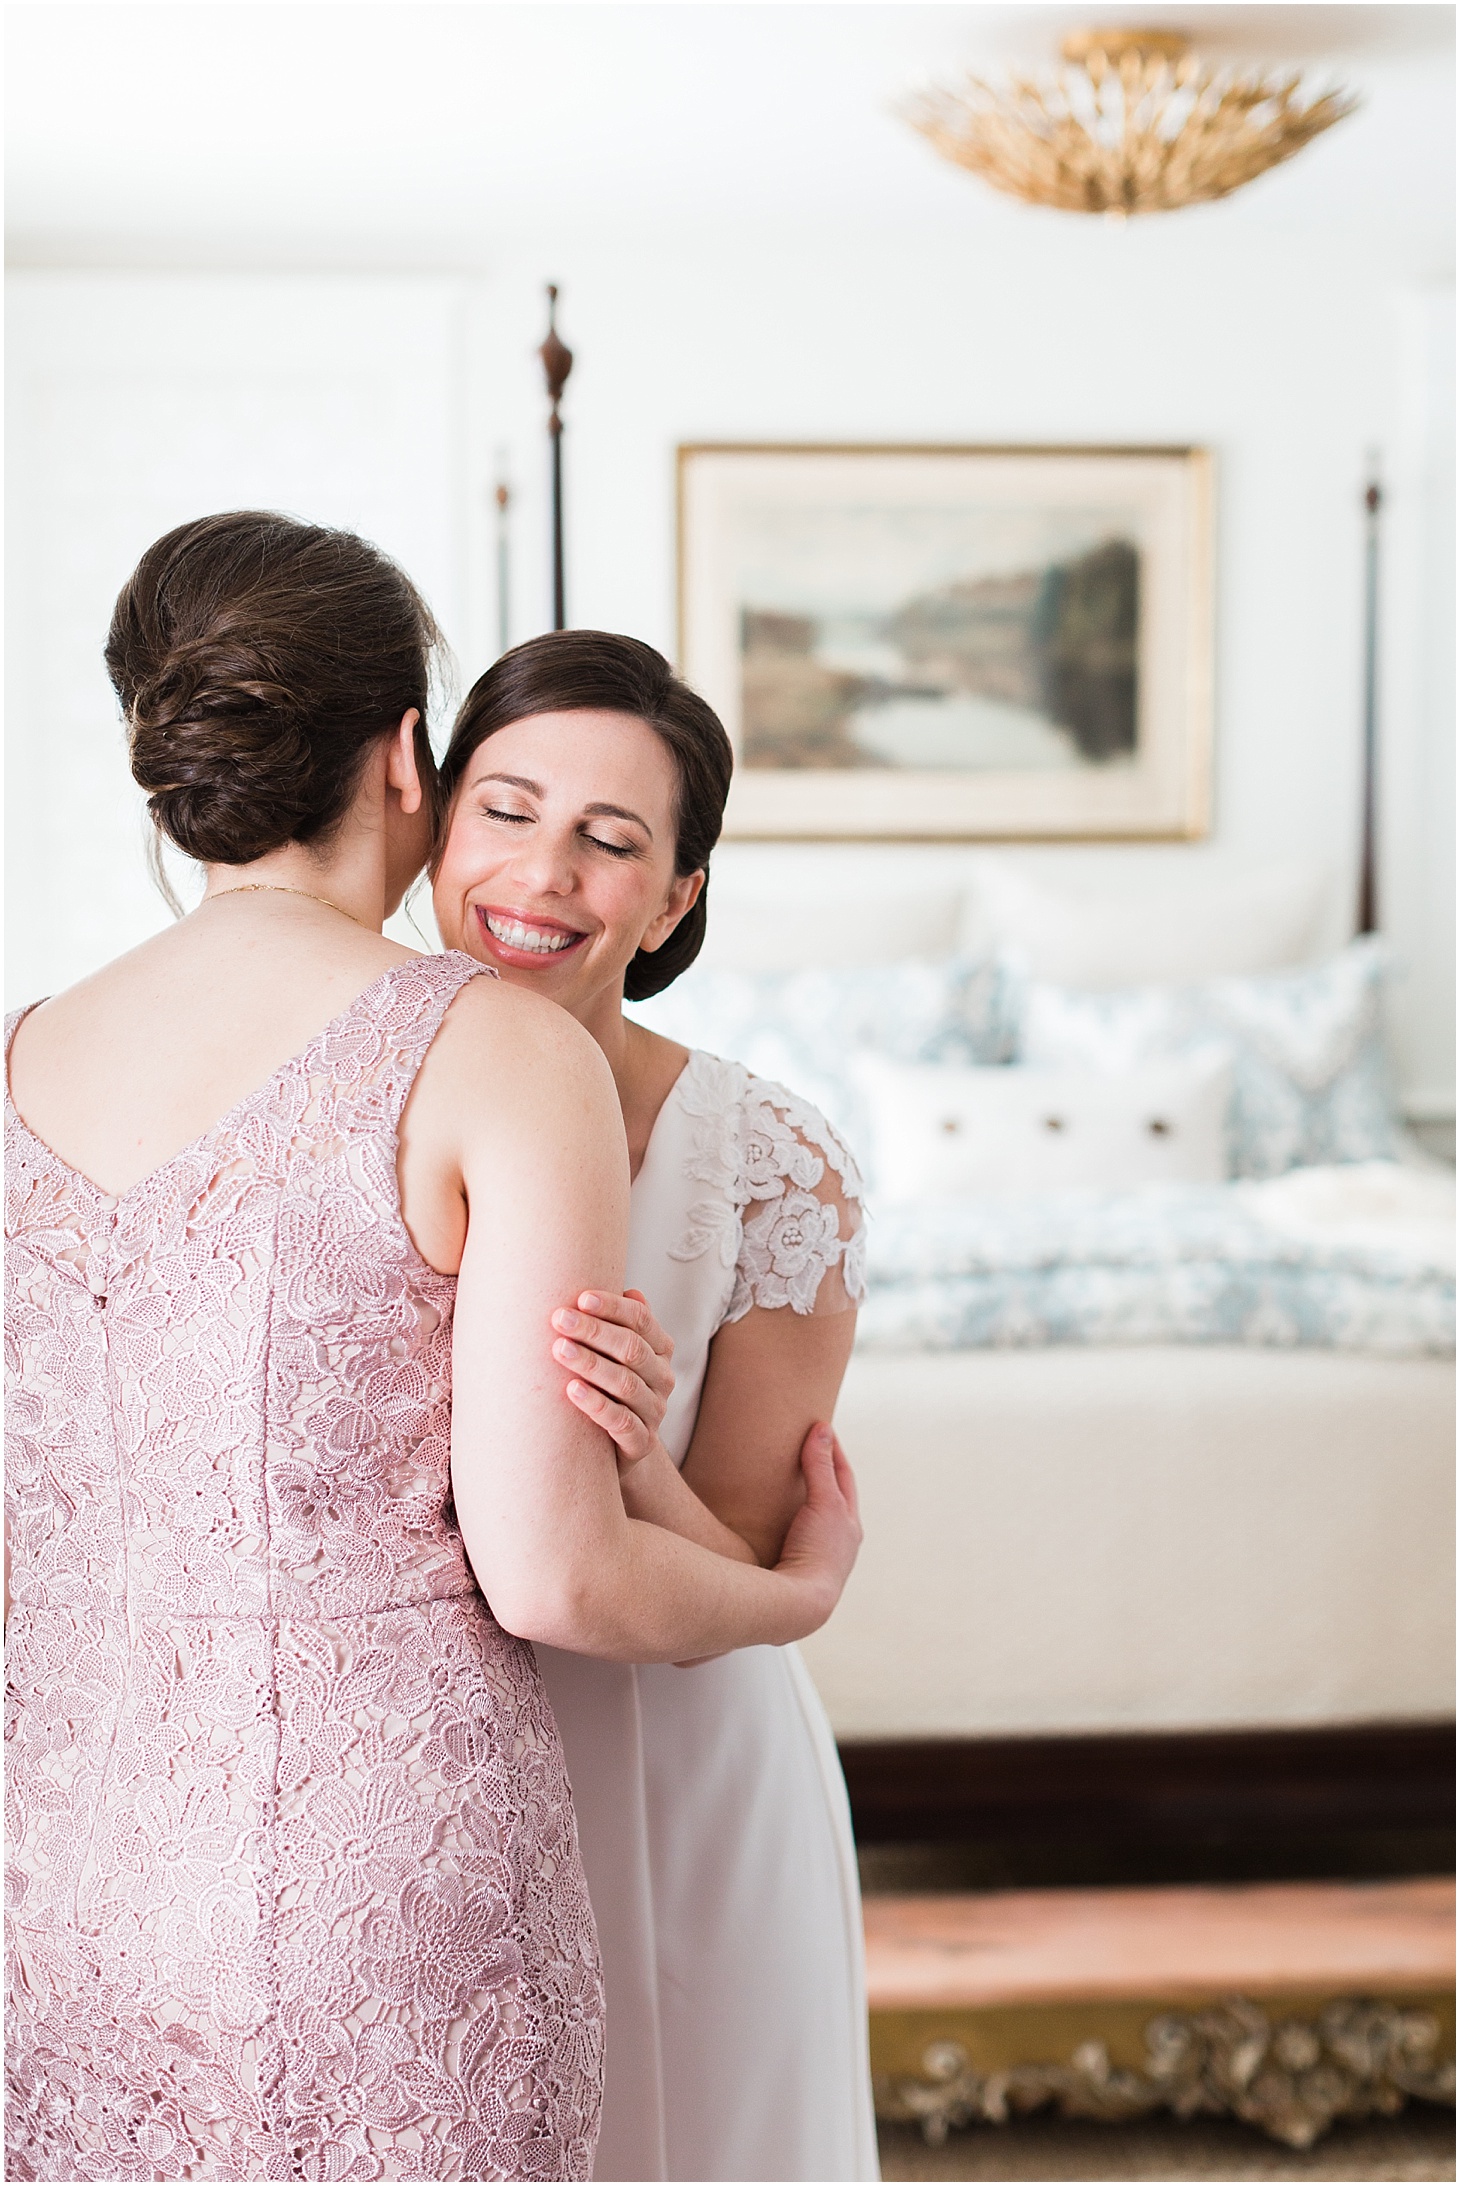 Bride Getting Ready at Parent's House | Ceremony at the Holy Rosary Church | Burgundy and Blush DC Wedding at District Winery | Sarah Bradshaw Photography